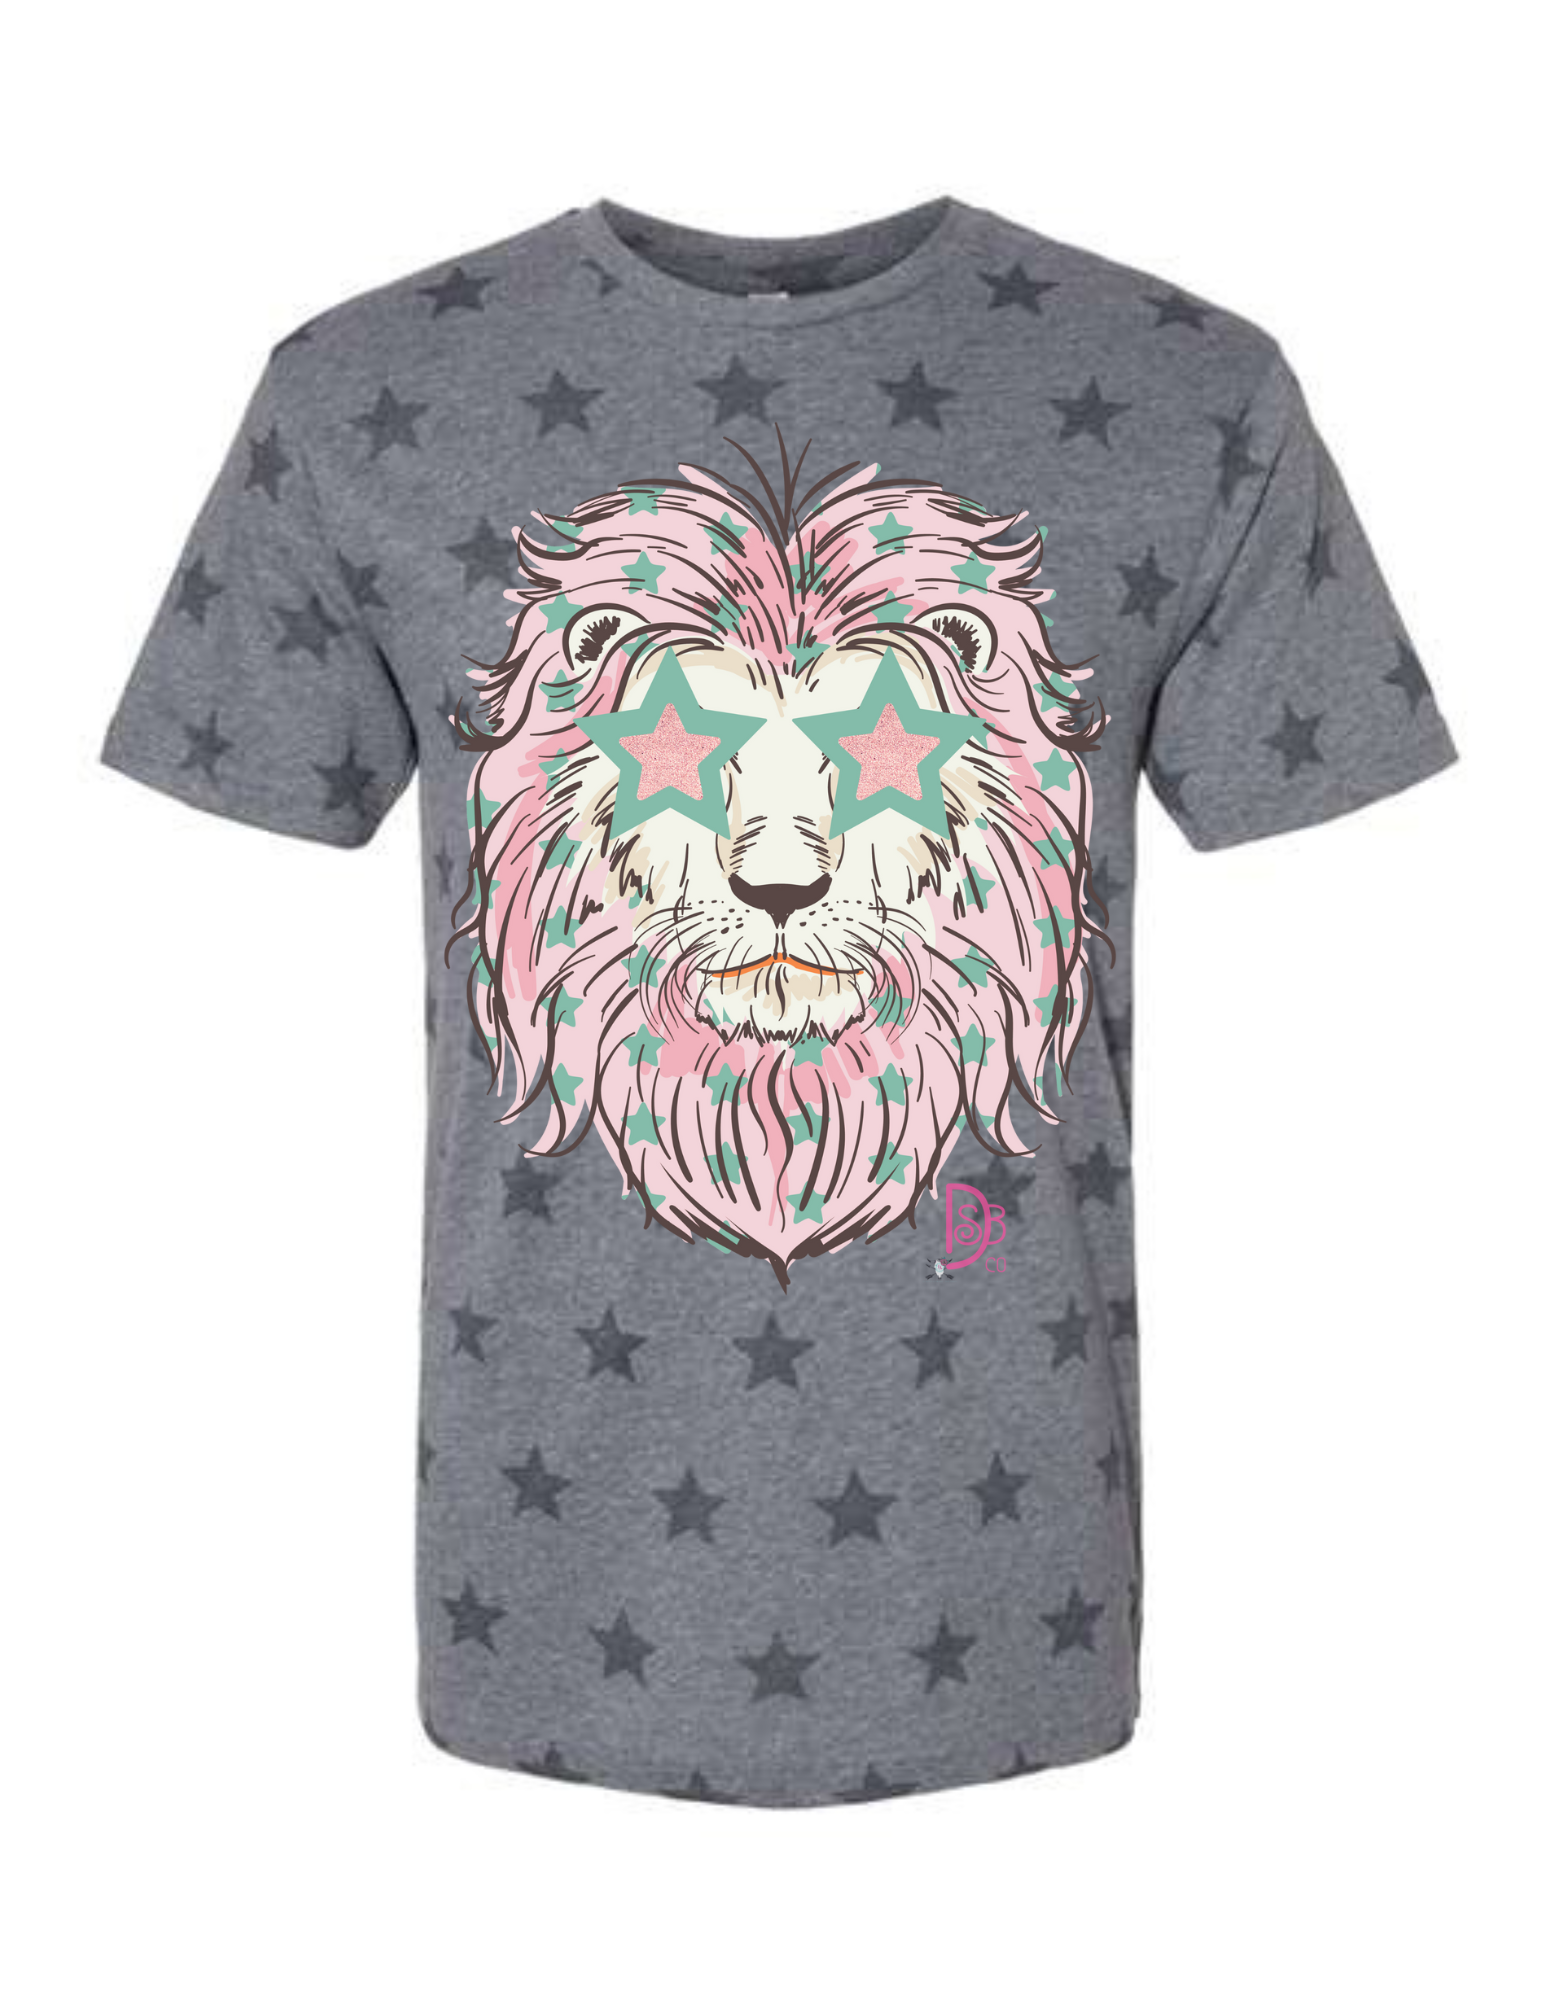 Seeing Stars Lion Graphic Tee-Graphic Tees-Deadwood South Boutique & Company-Deadwood South Boutique, Women's Fashion Boutique in Henderson, TX